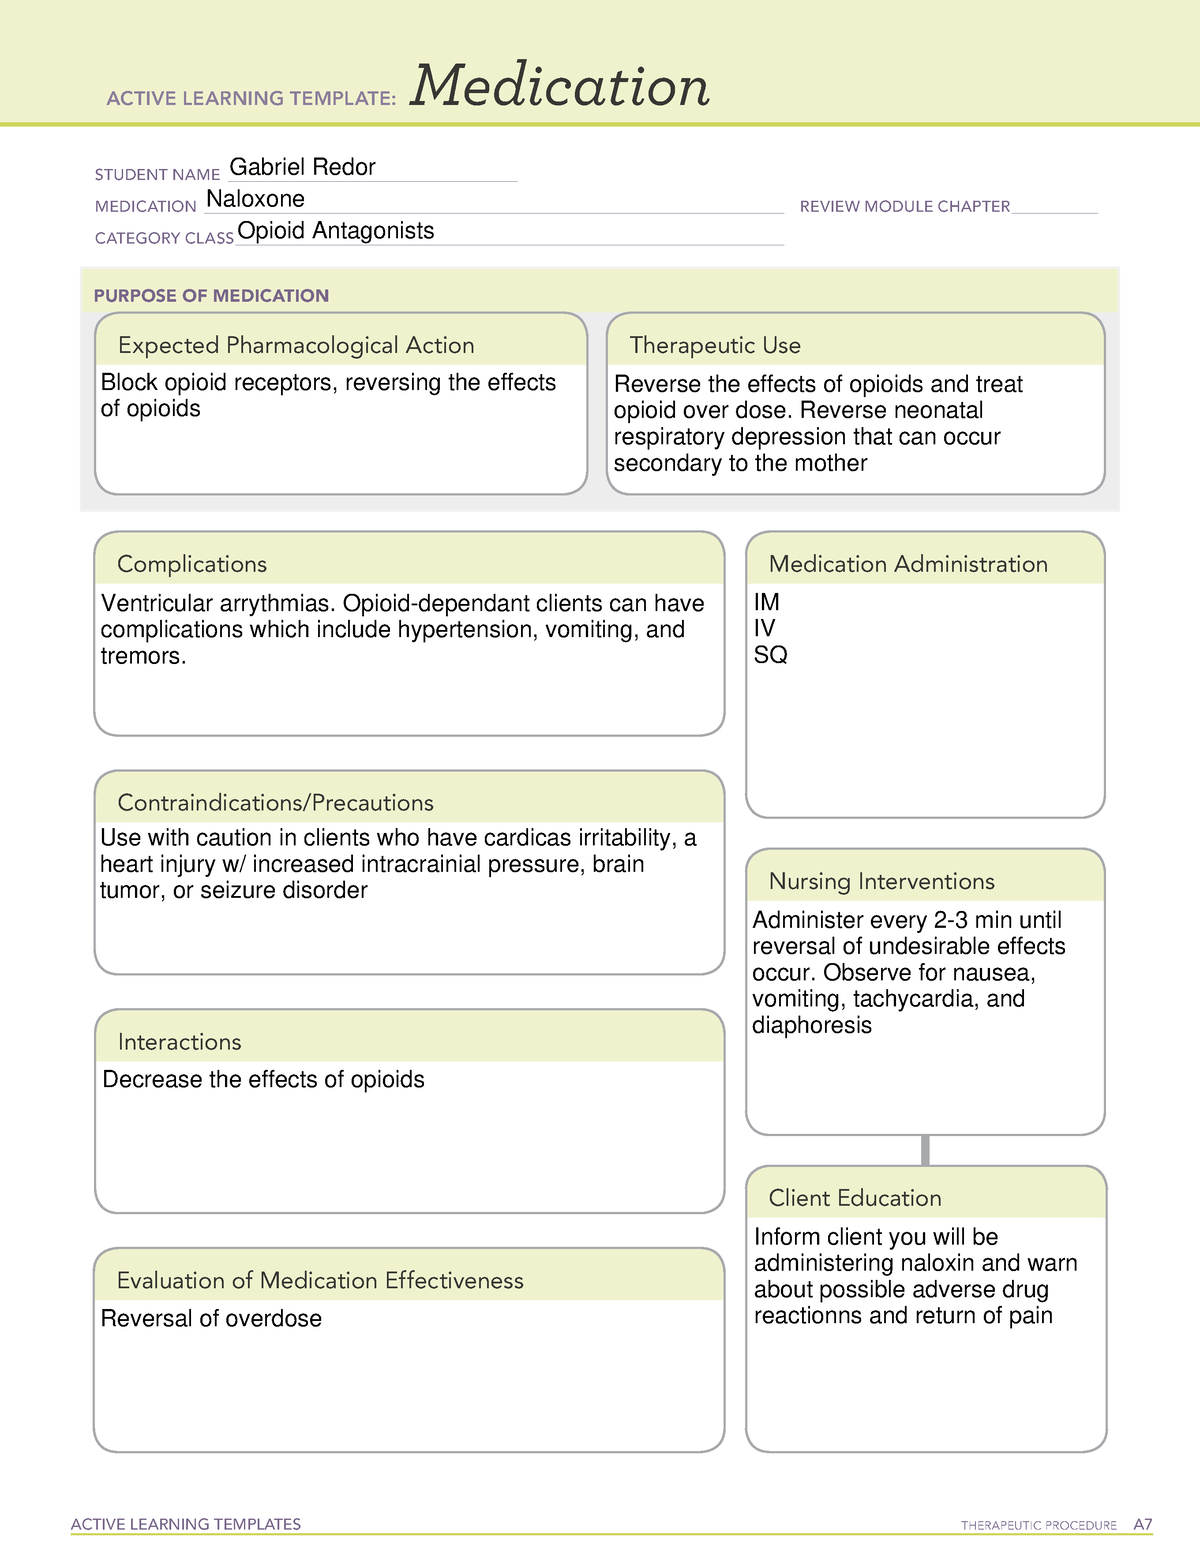 Naloxone ATI med template ACTIVE LEARNING TEMPLATES THERAPEUTIC